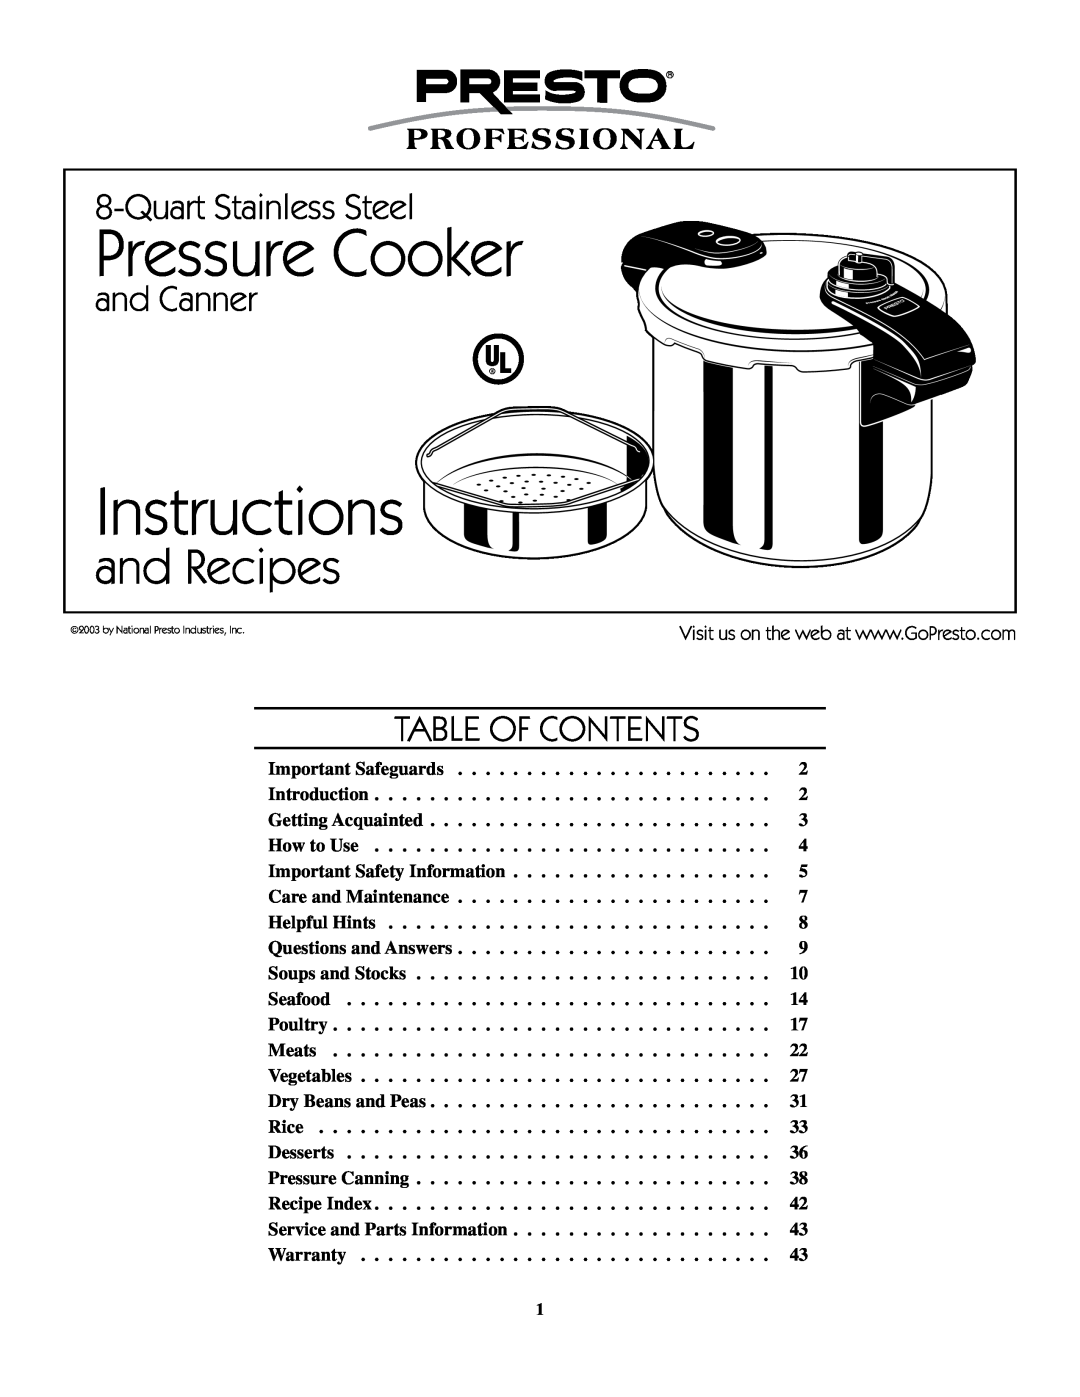 Presto 8-Quart Stainless Steel Pressure Cooker warranty and Canner, Table of Contents, instructions, and Recipes 